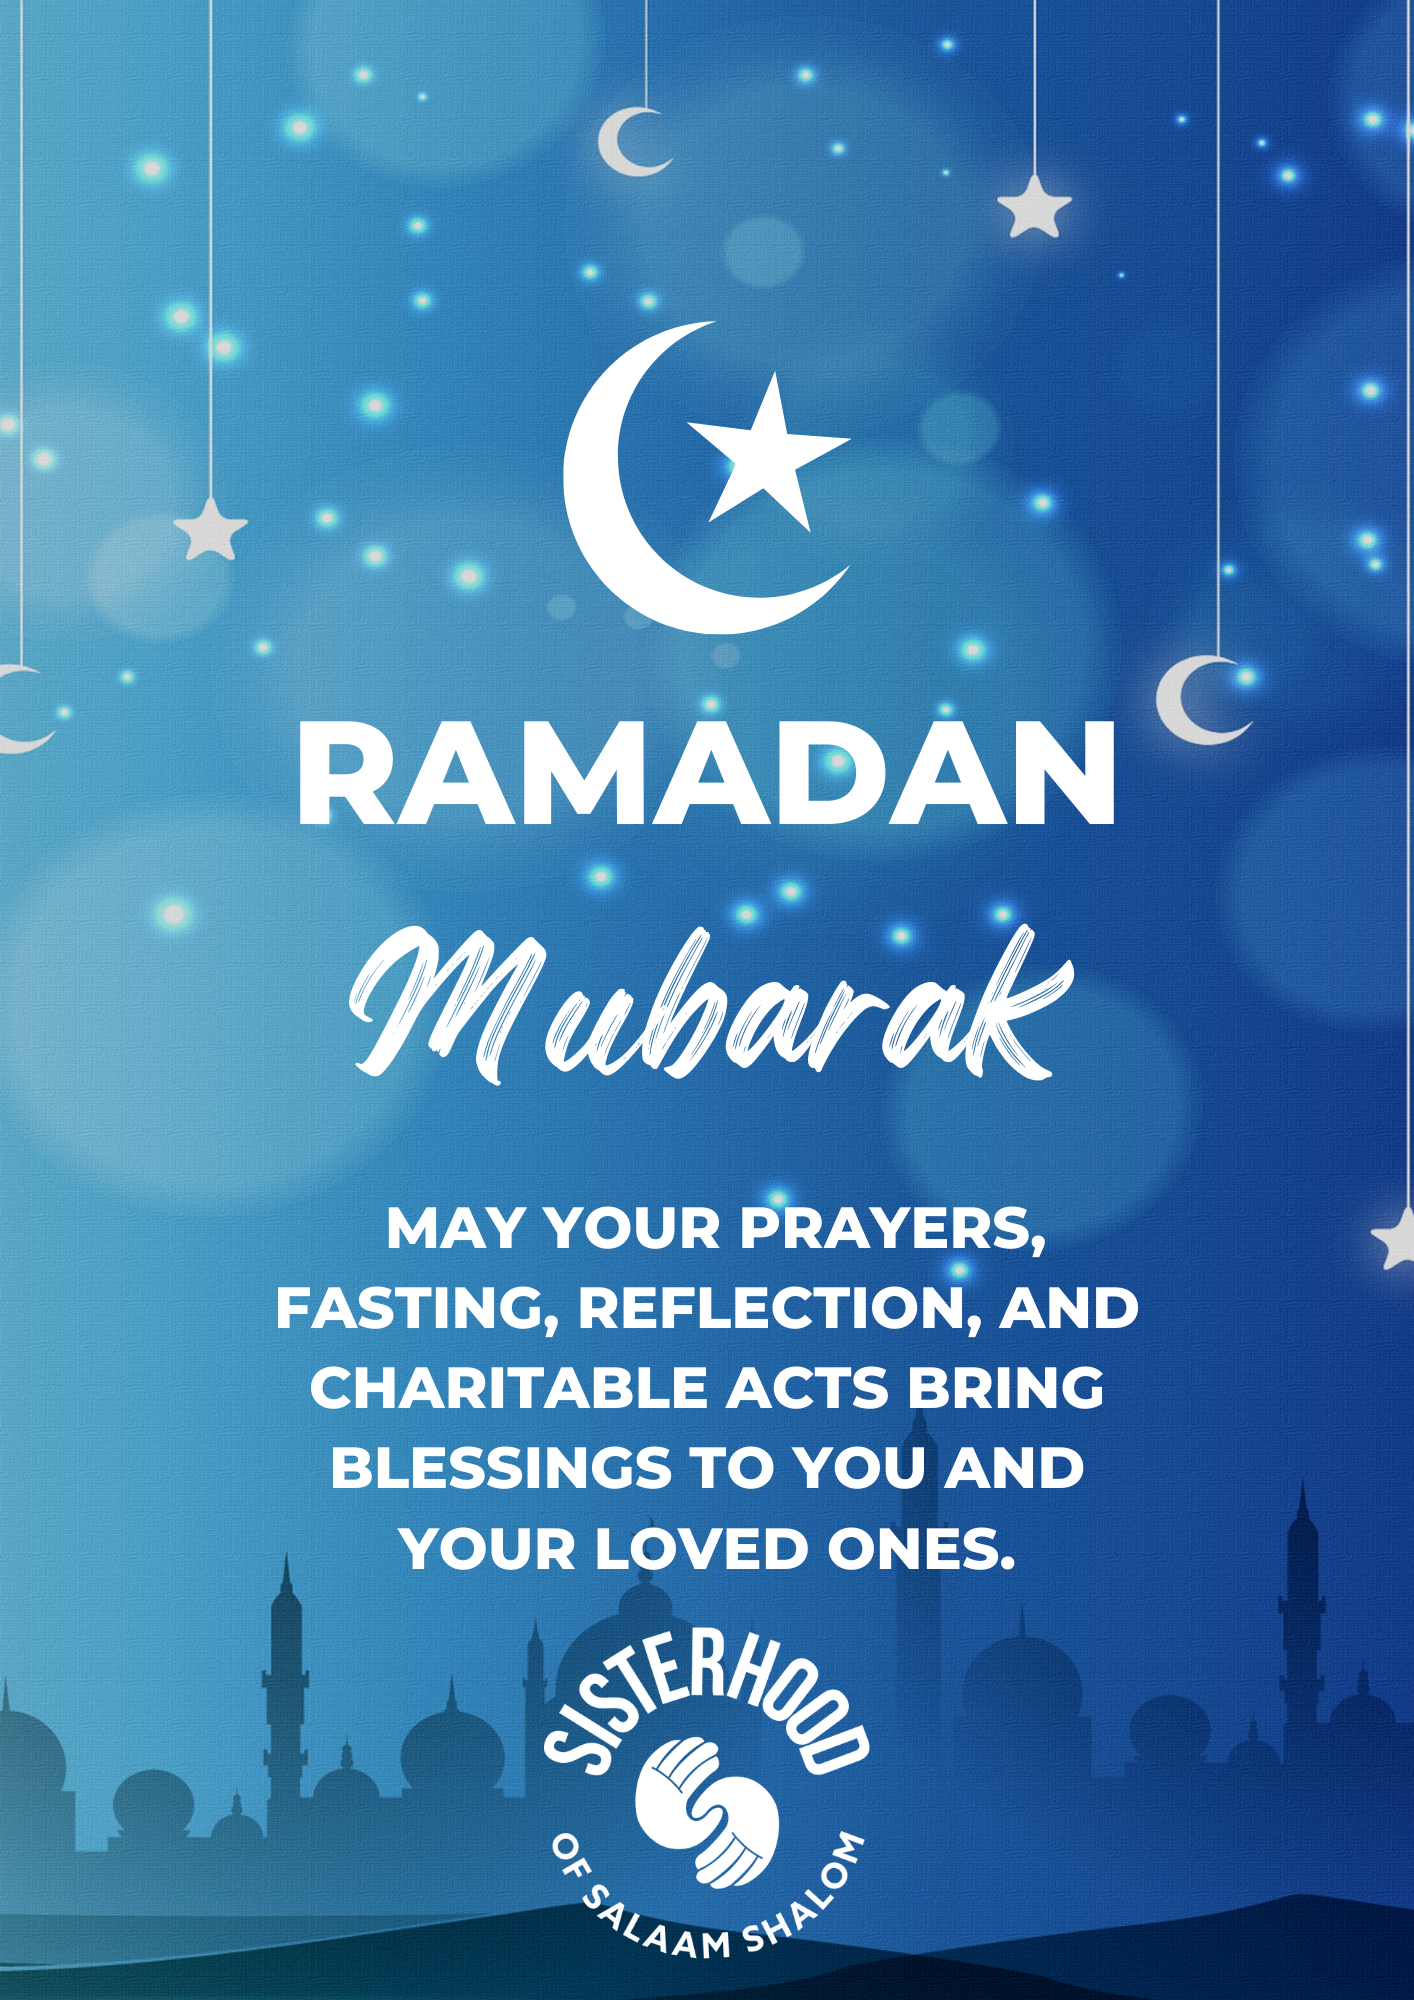 Blue background with outlined cityscape and white crescent moon and star- Ramadan Mubarak